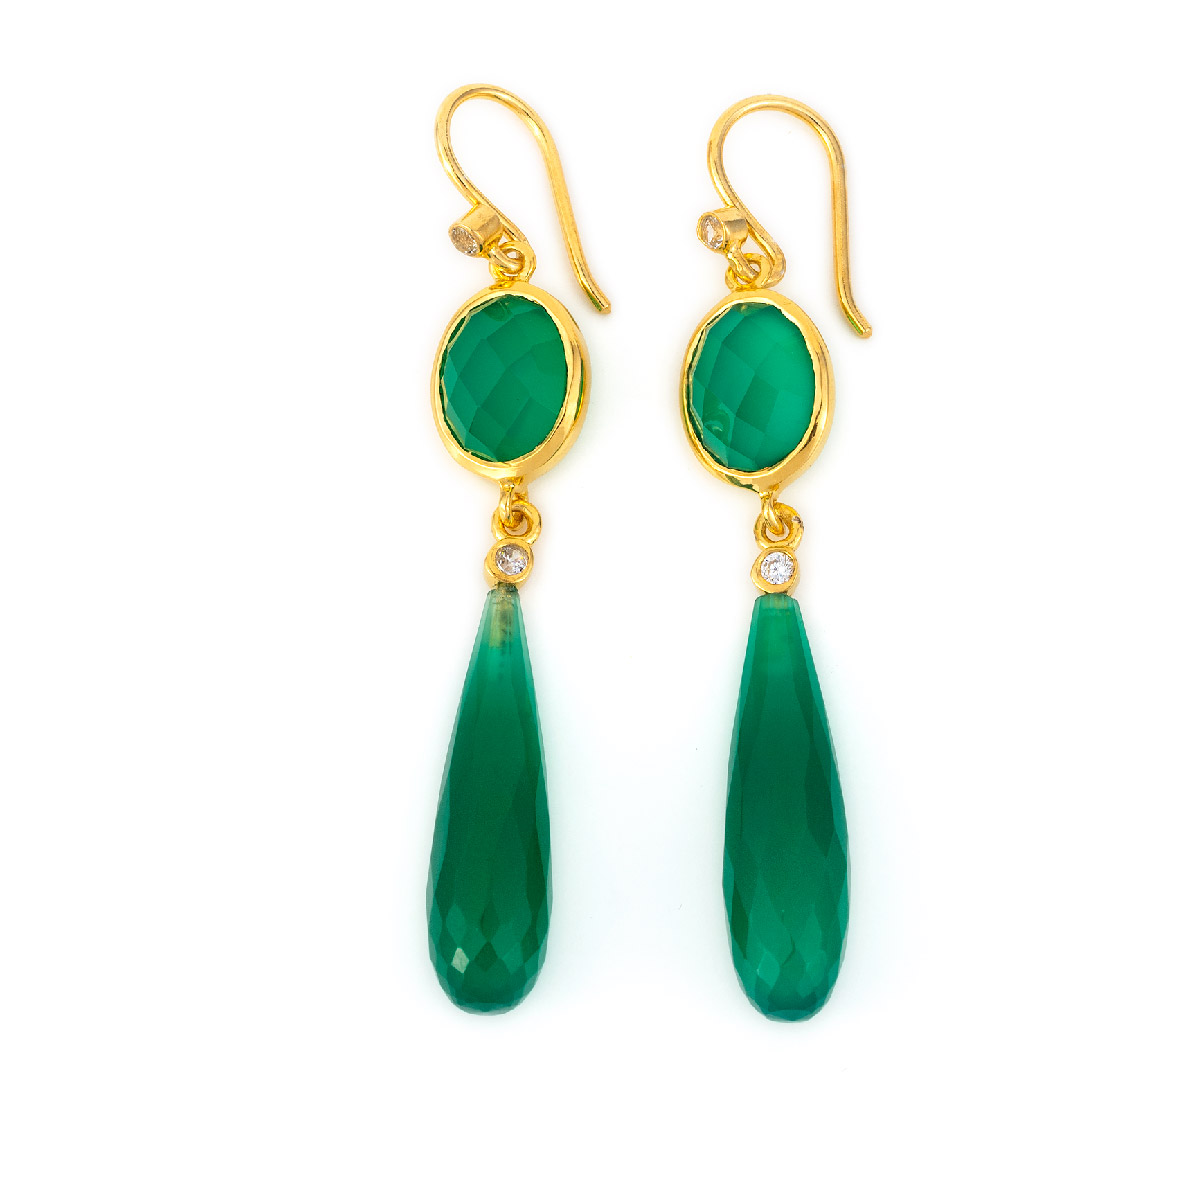 Green Chalcedony Dangle Earrings - Sterling Silver and Gold Plated